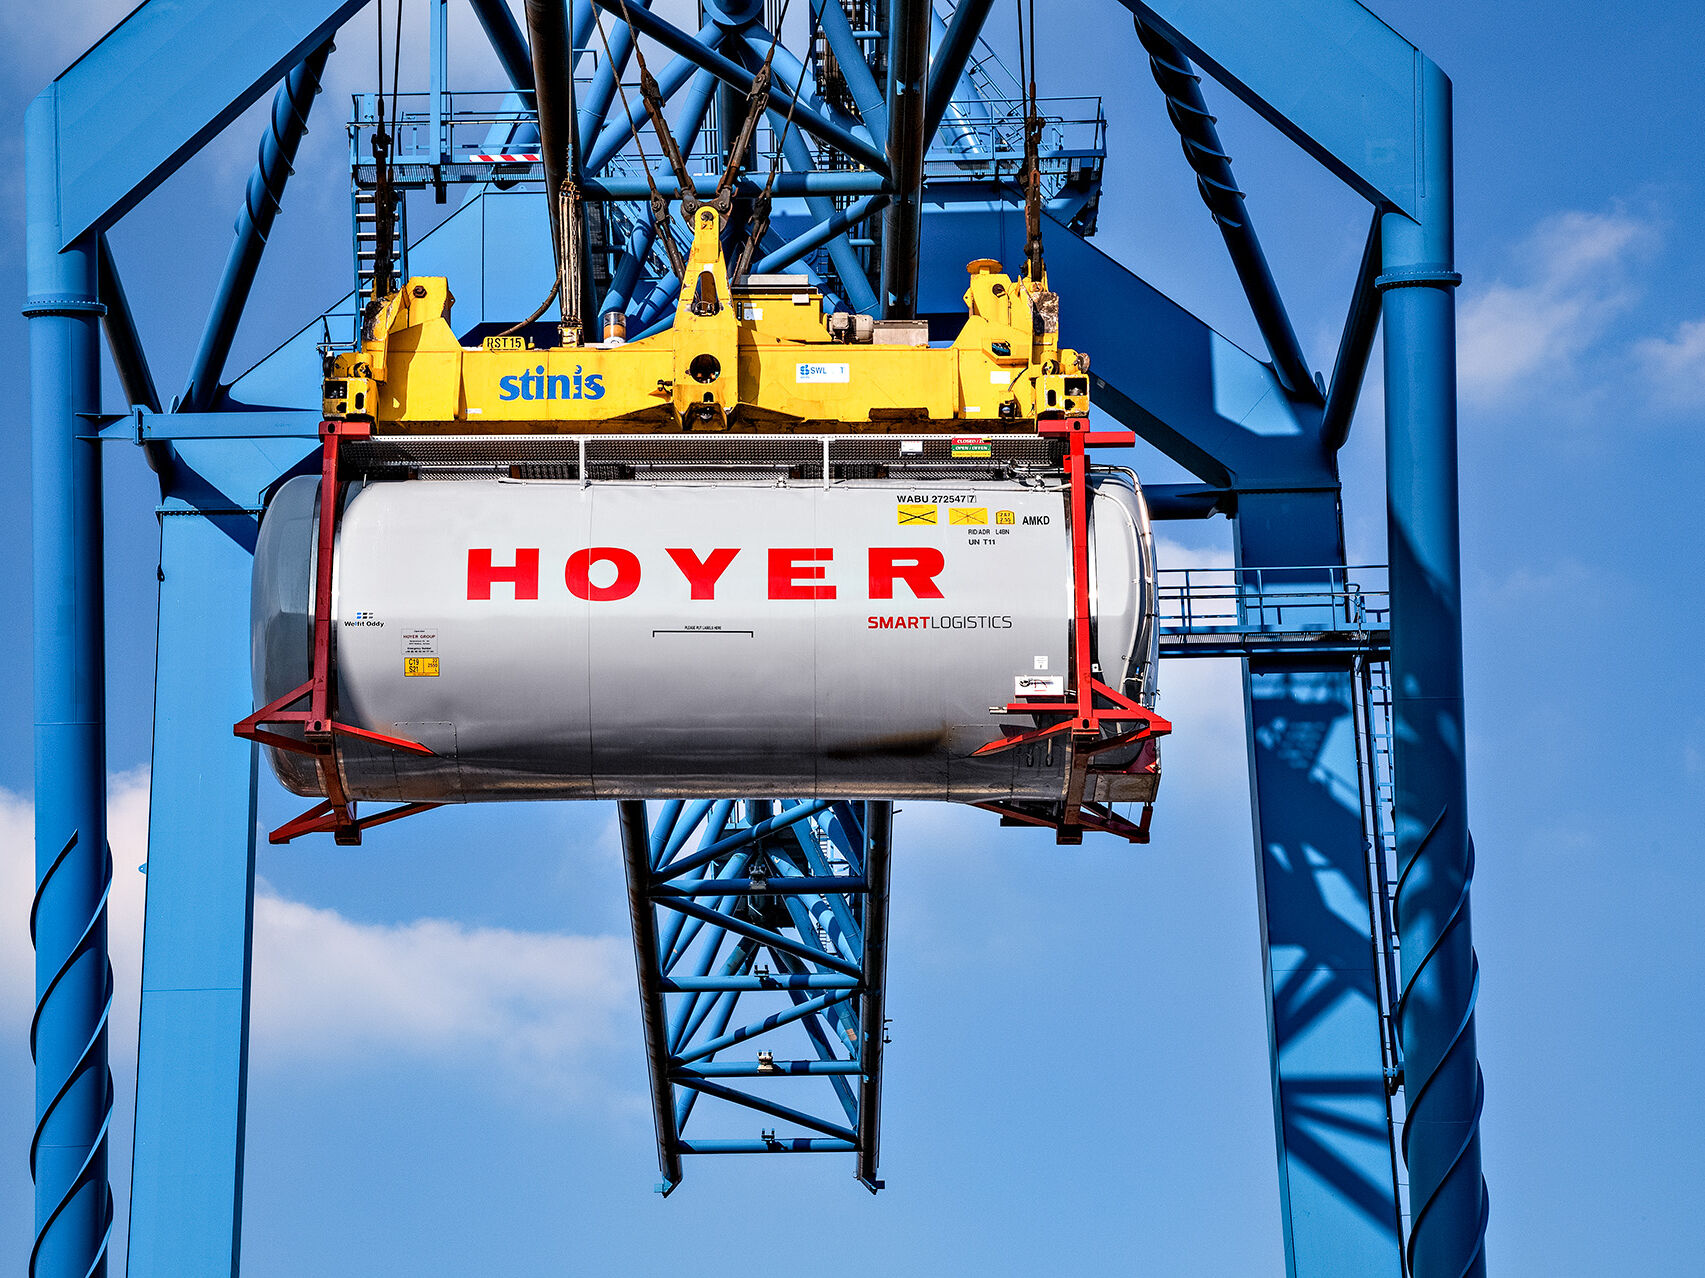 HOYER chemical tank container smart logistics on a crane